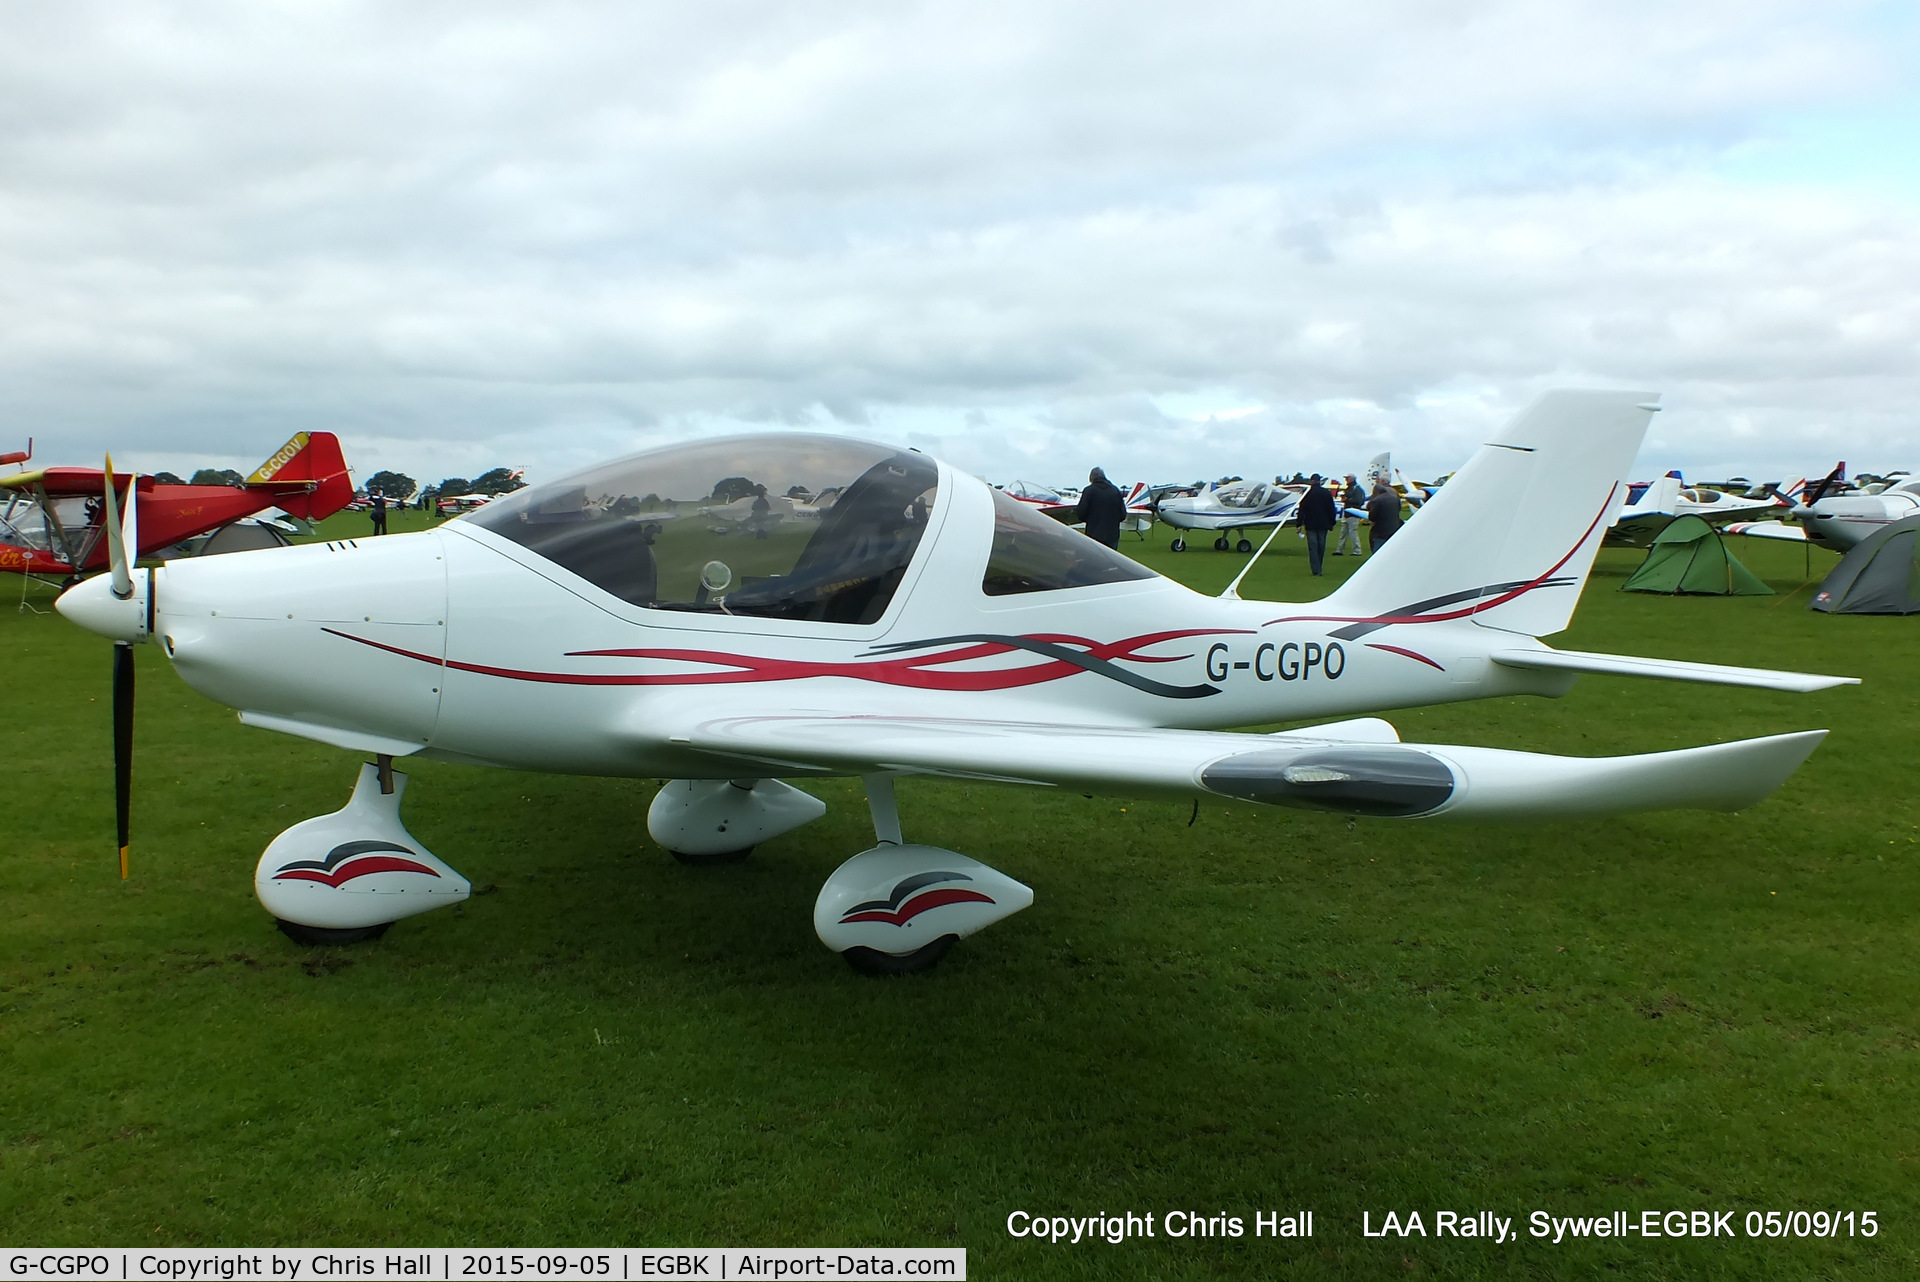 G-CGPO, 2011 TL Ultralight TL-2000UK Sting Carbon C/N LAA 347-14896, at the LAA Rally 2015, Sywell